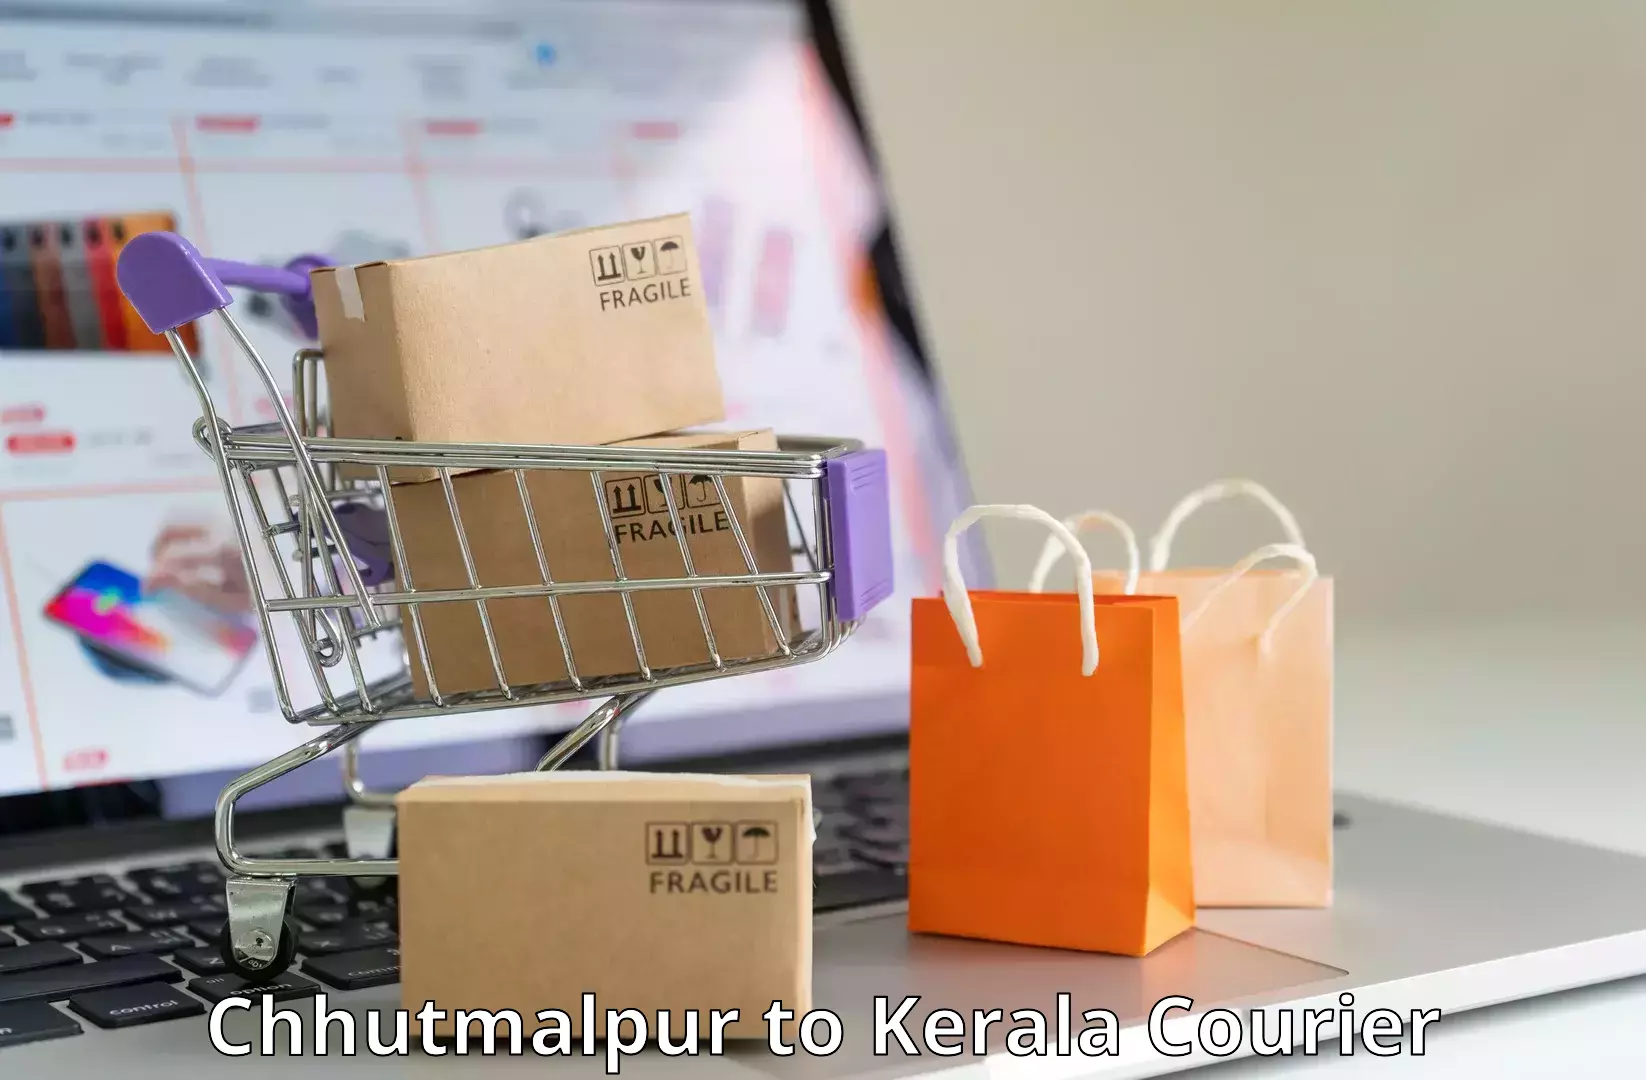 Customer-oriented courier services Chhutmalpur to Kerala